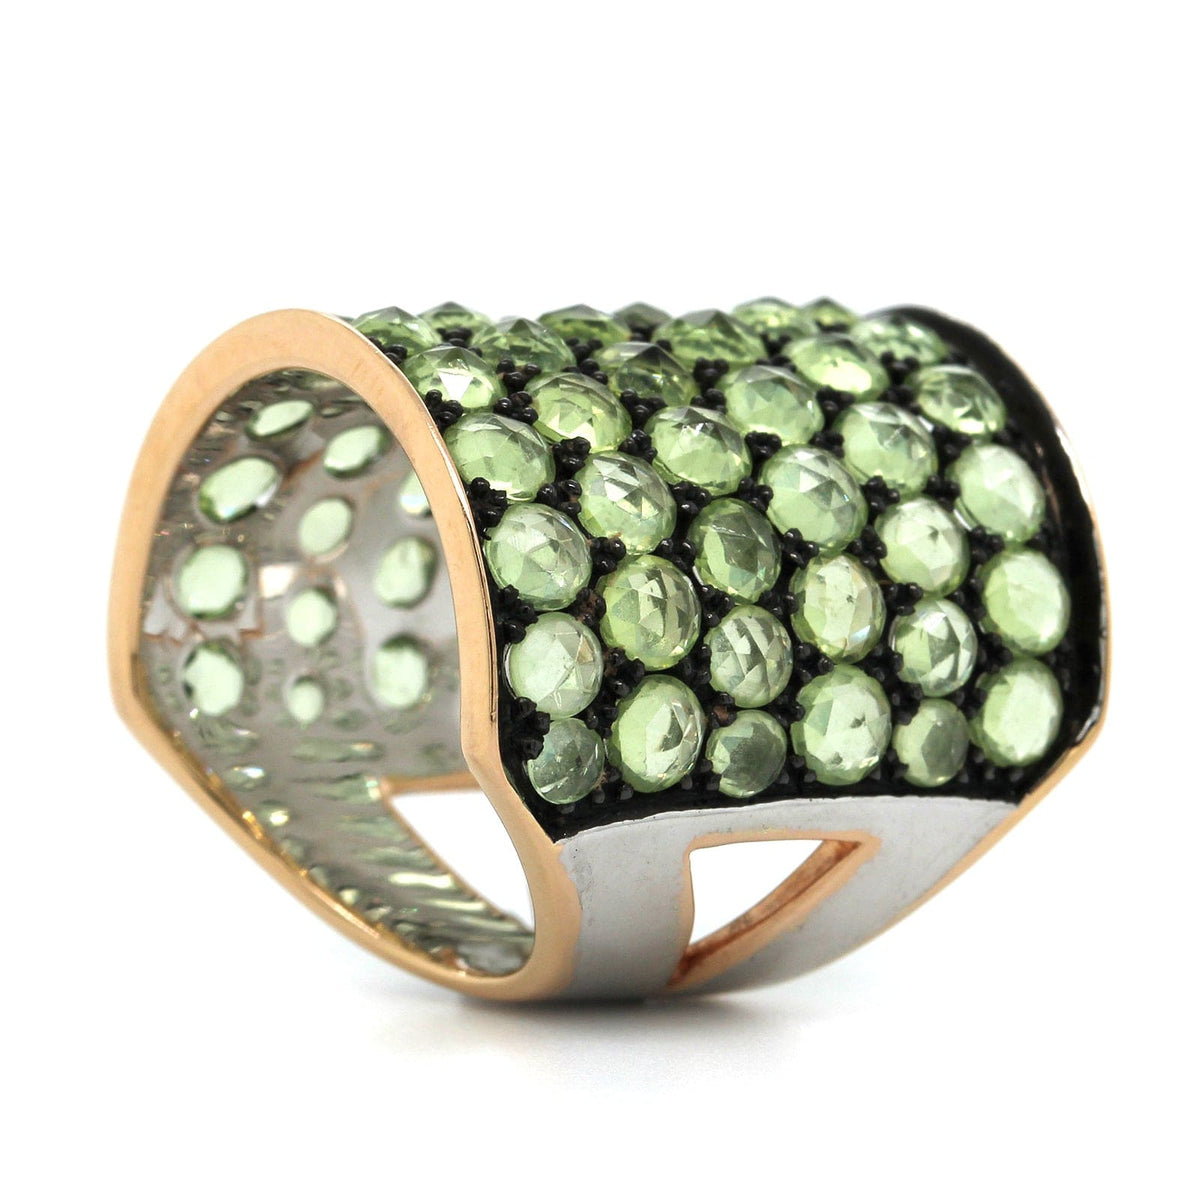 Etho Maria Sterling Silver and 18K Rose Gold Peridot Ring